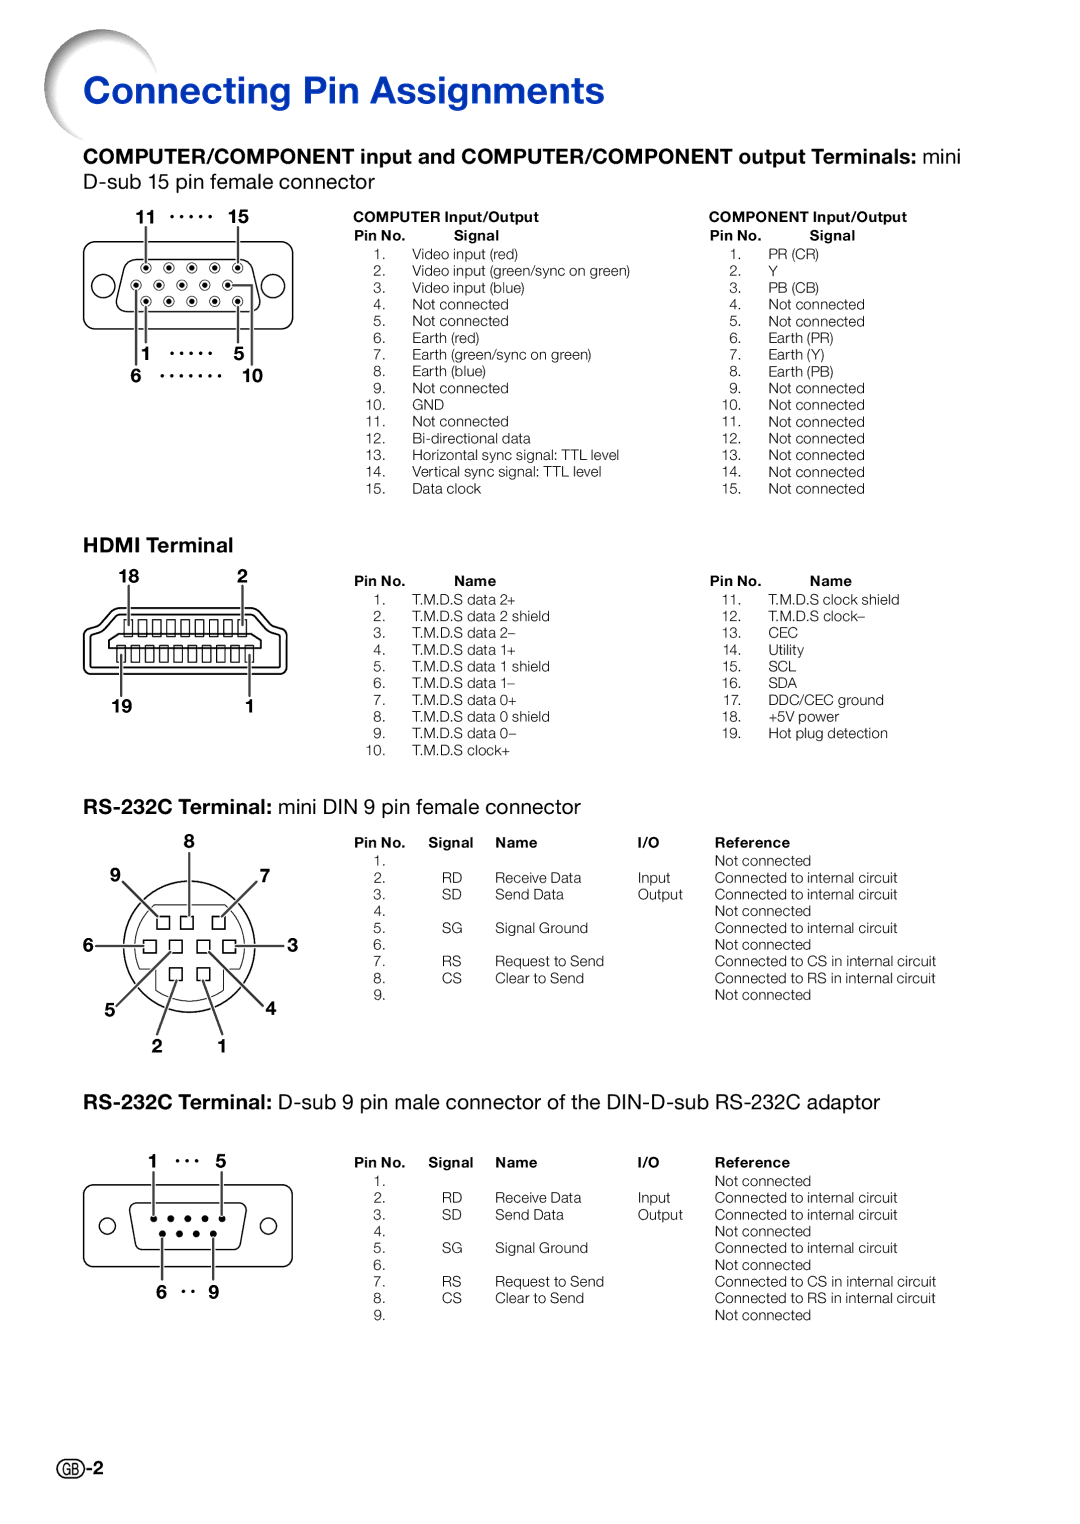 Sharp PG-D3550W, PG-D2870W, PG-D3050W specifications Connecting Pin Assignments, Sub 15 pin female connector 